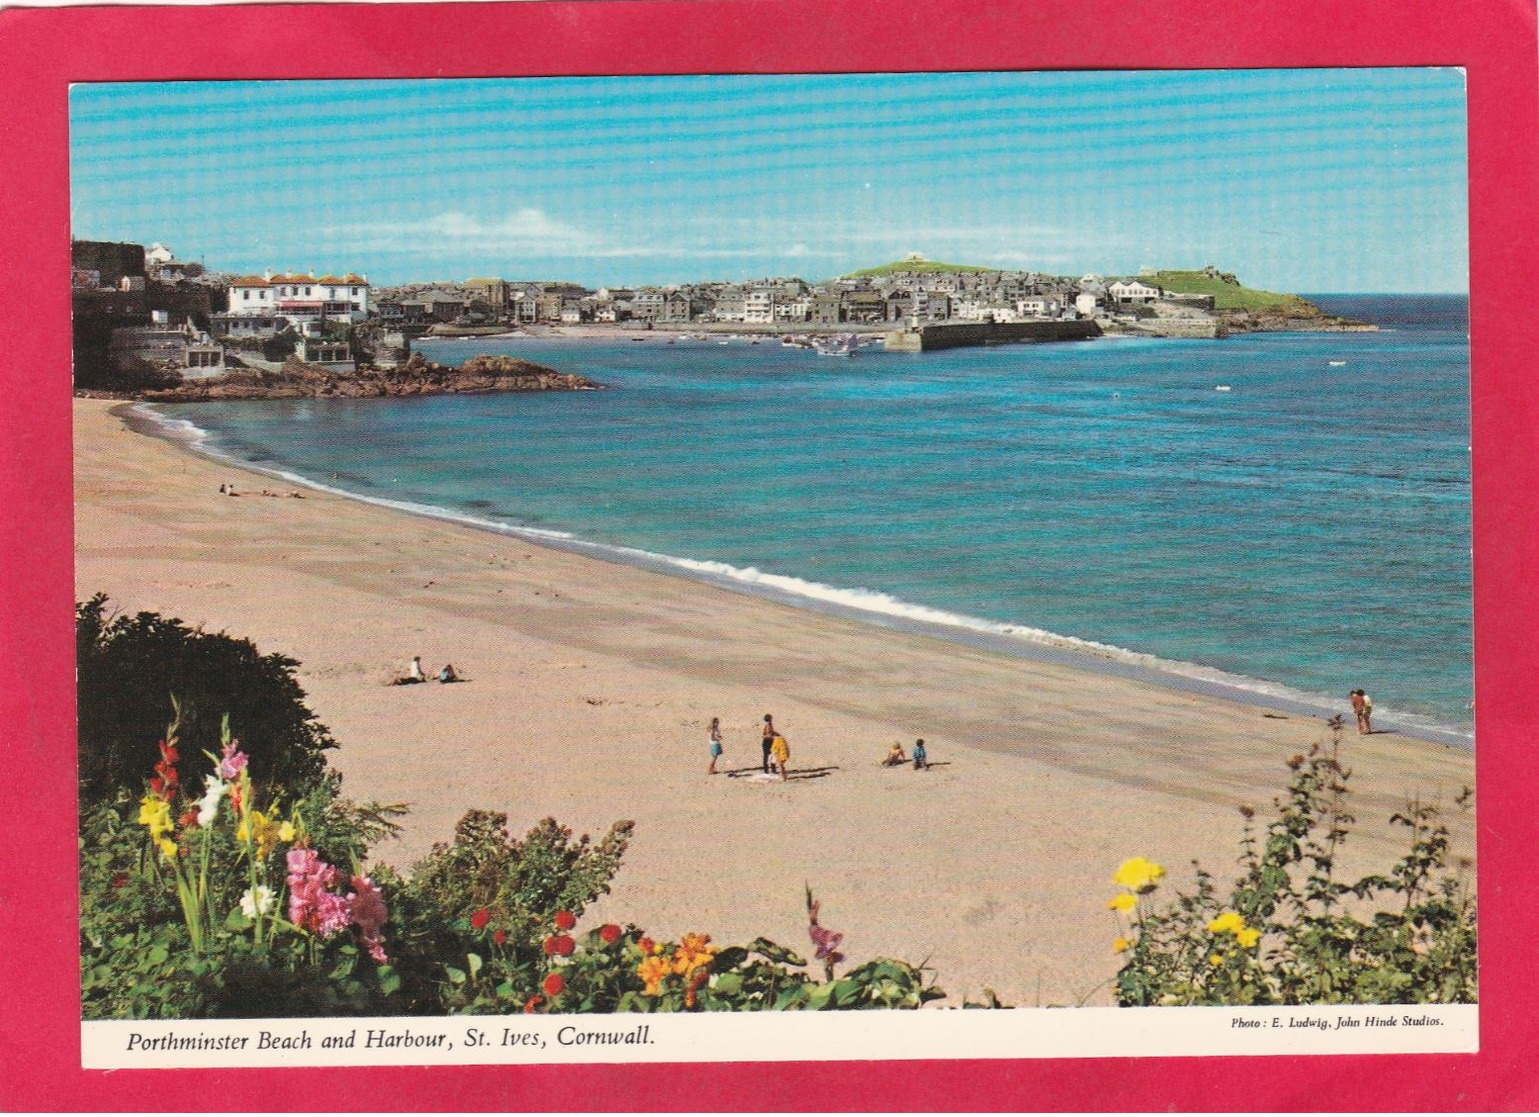 Modern Post Card Of The Harbour And Beach,St.Ives,Cornwall,England,A71. - St.Ives